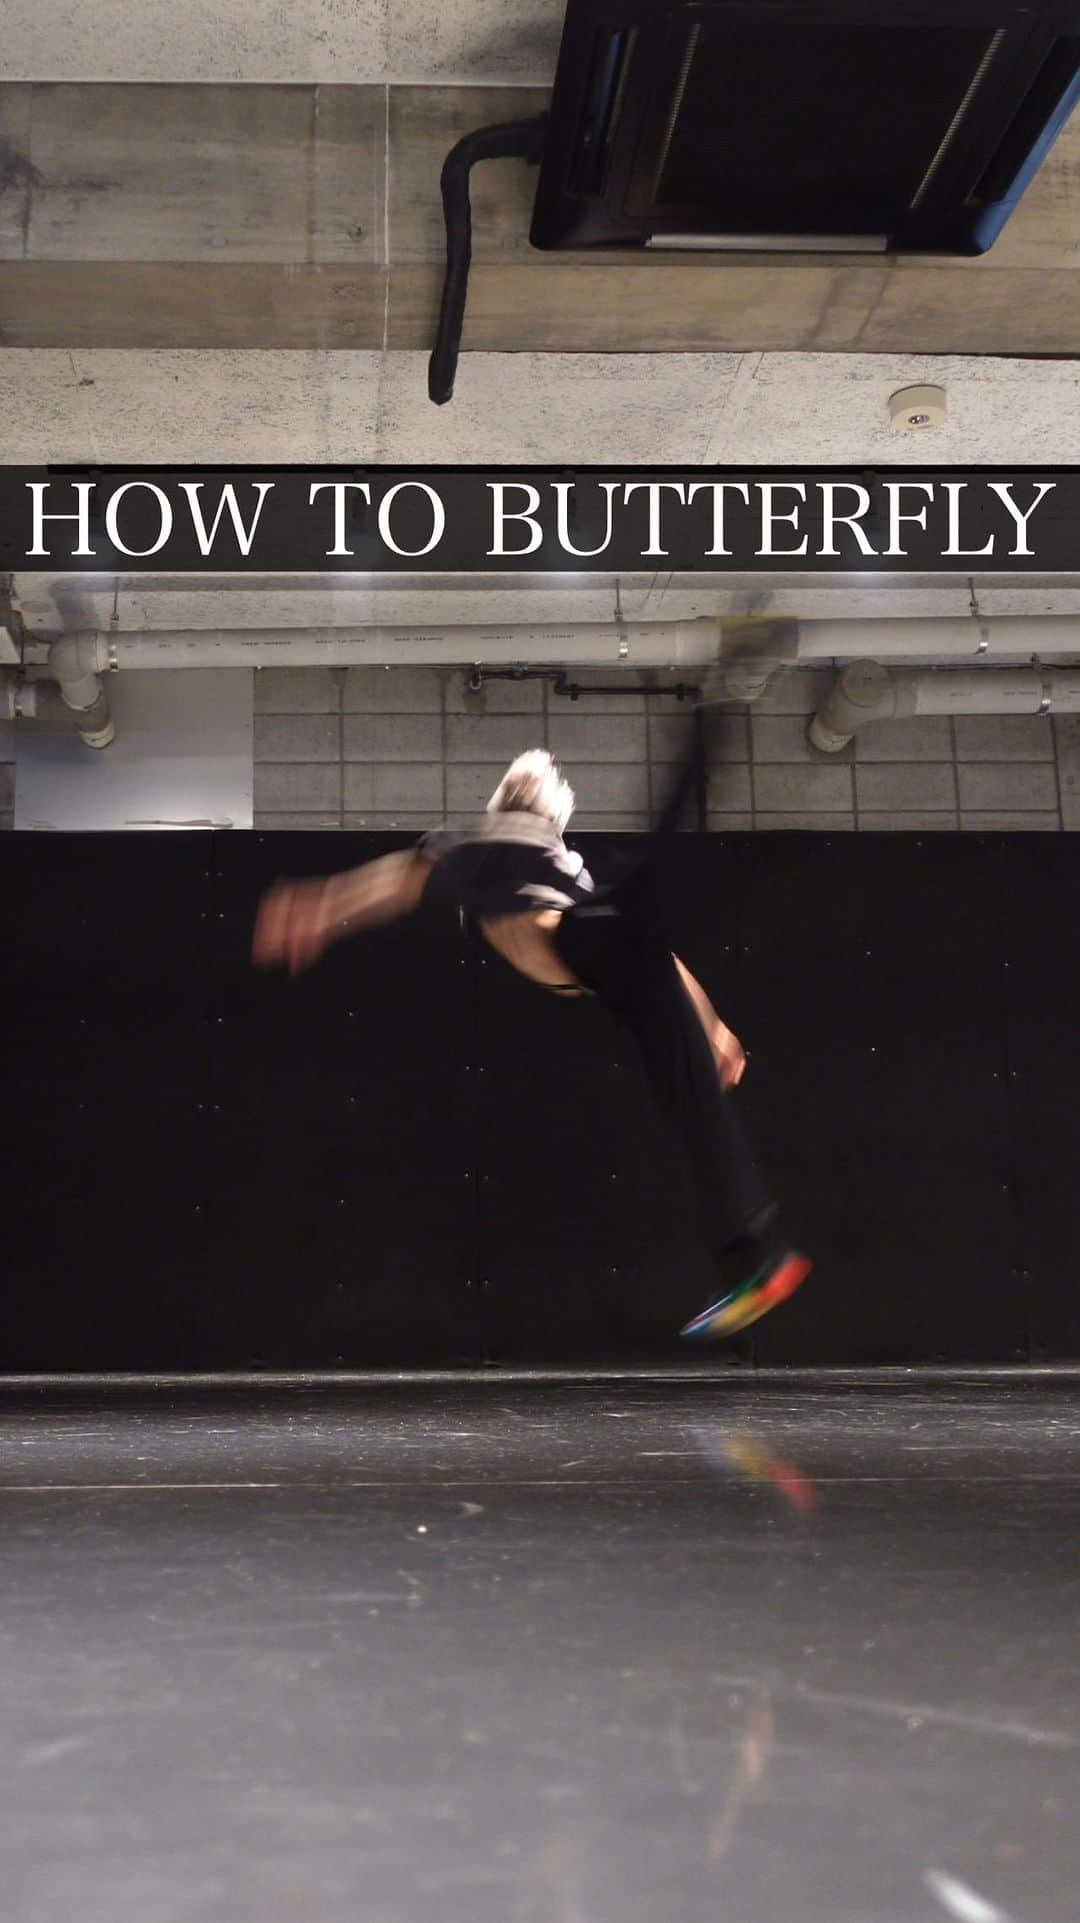 asukaのインスタグラム：「The easy way to learn 【BUTTERFLY 】    Everybody can do this skill 🔥   What do you think?🤔   Lectured by @bboy_asuka   If you can master it, let me know in the comments😉   ↓↓↓↓    #dance #breaking #breakdance #bboy #powermove #powermoves #acrobatics #tricking #parkour #gymnastics #movement #capoeira #ブレイキン #超人」